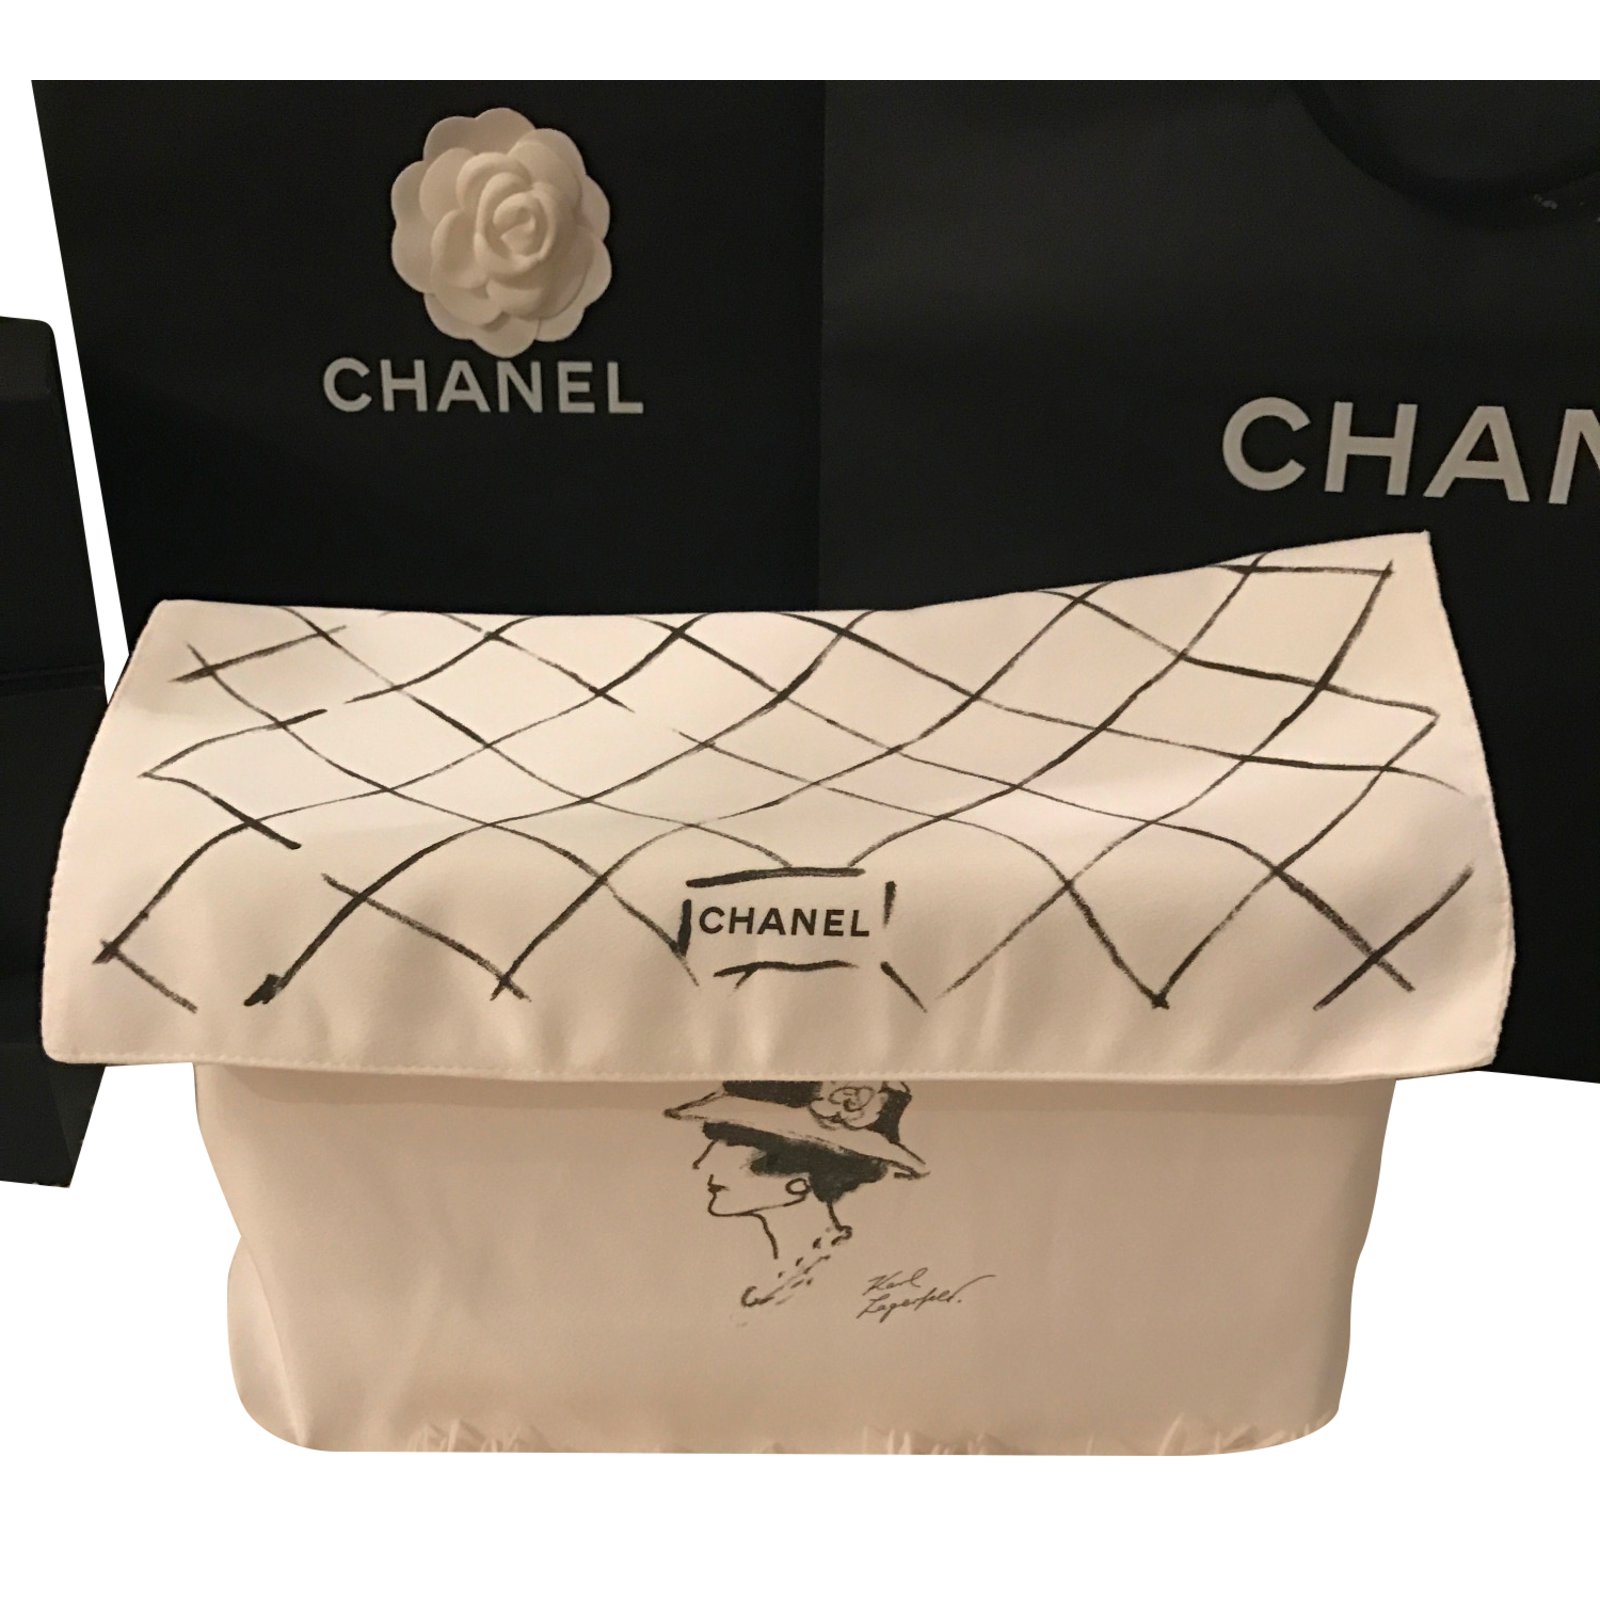 Authentic Chanel Dust Bag  Black and white bags, Classic flap bag